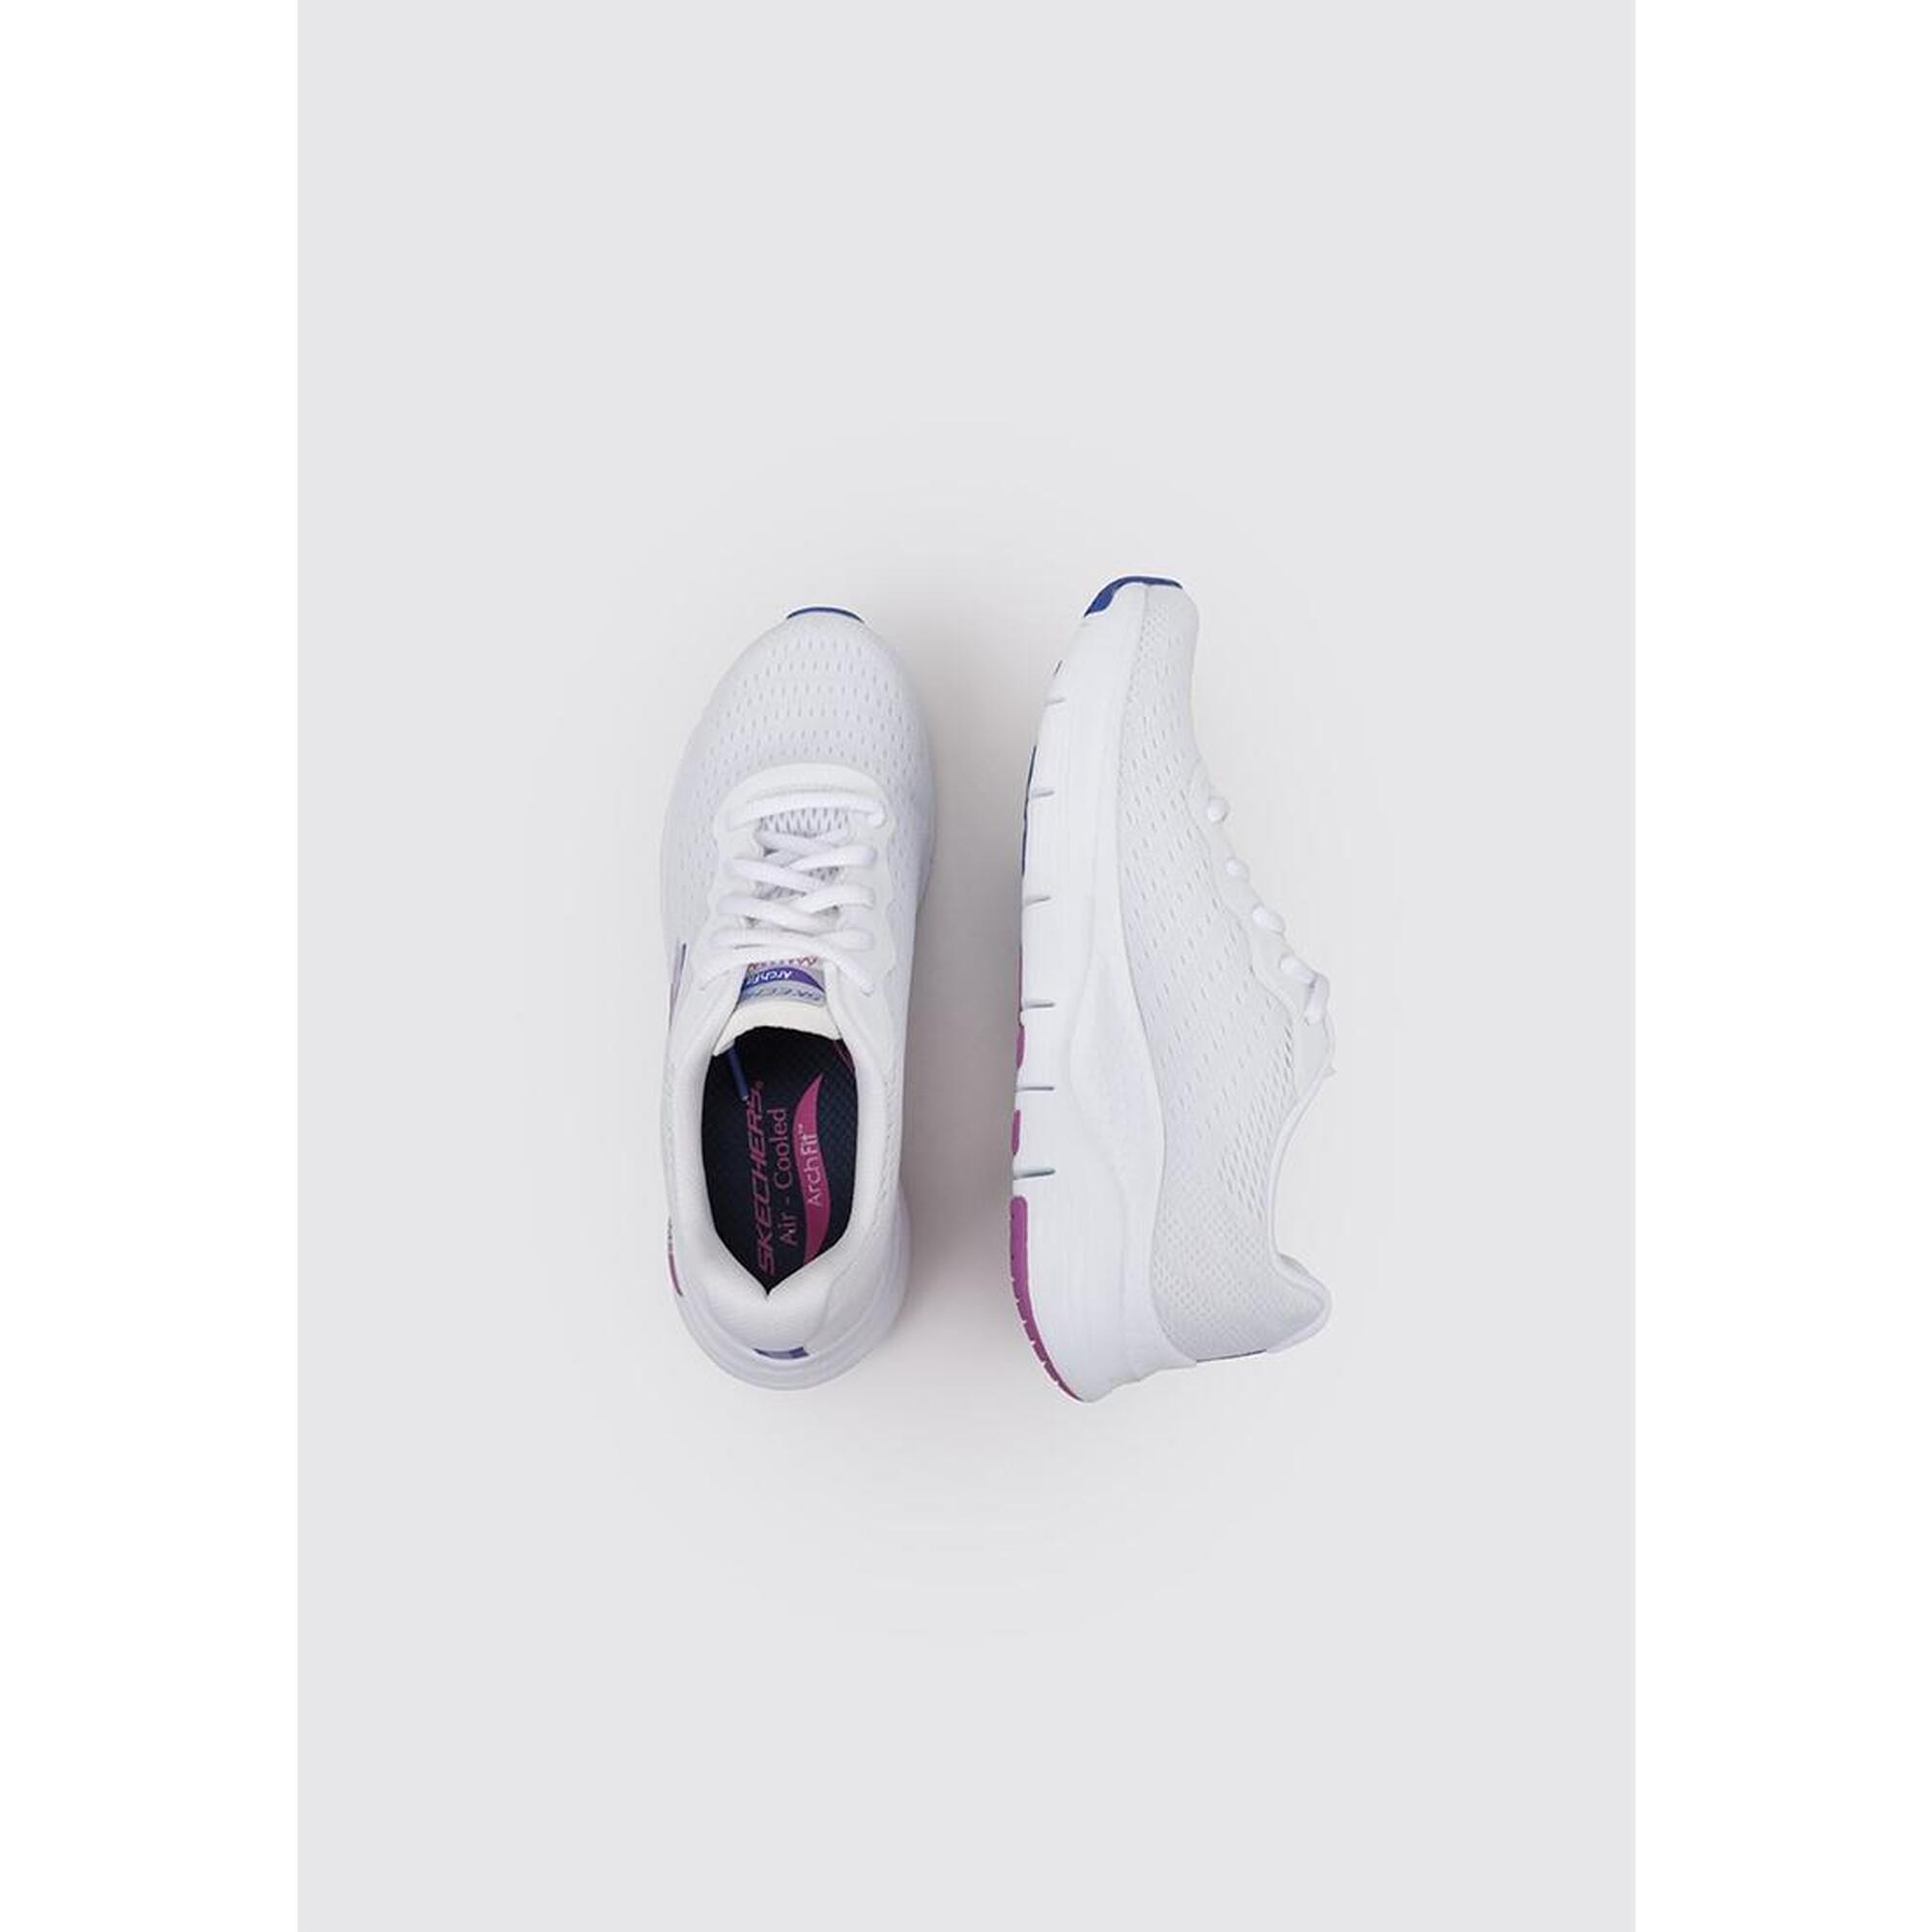 Sneakers pour femmes Skechers Arch Fit-Infinity Cool